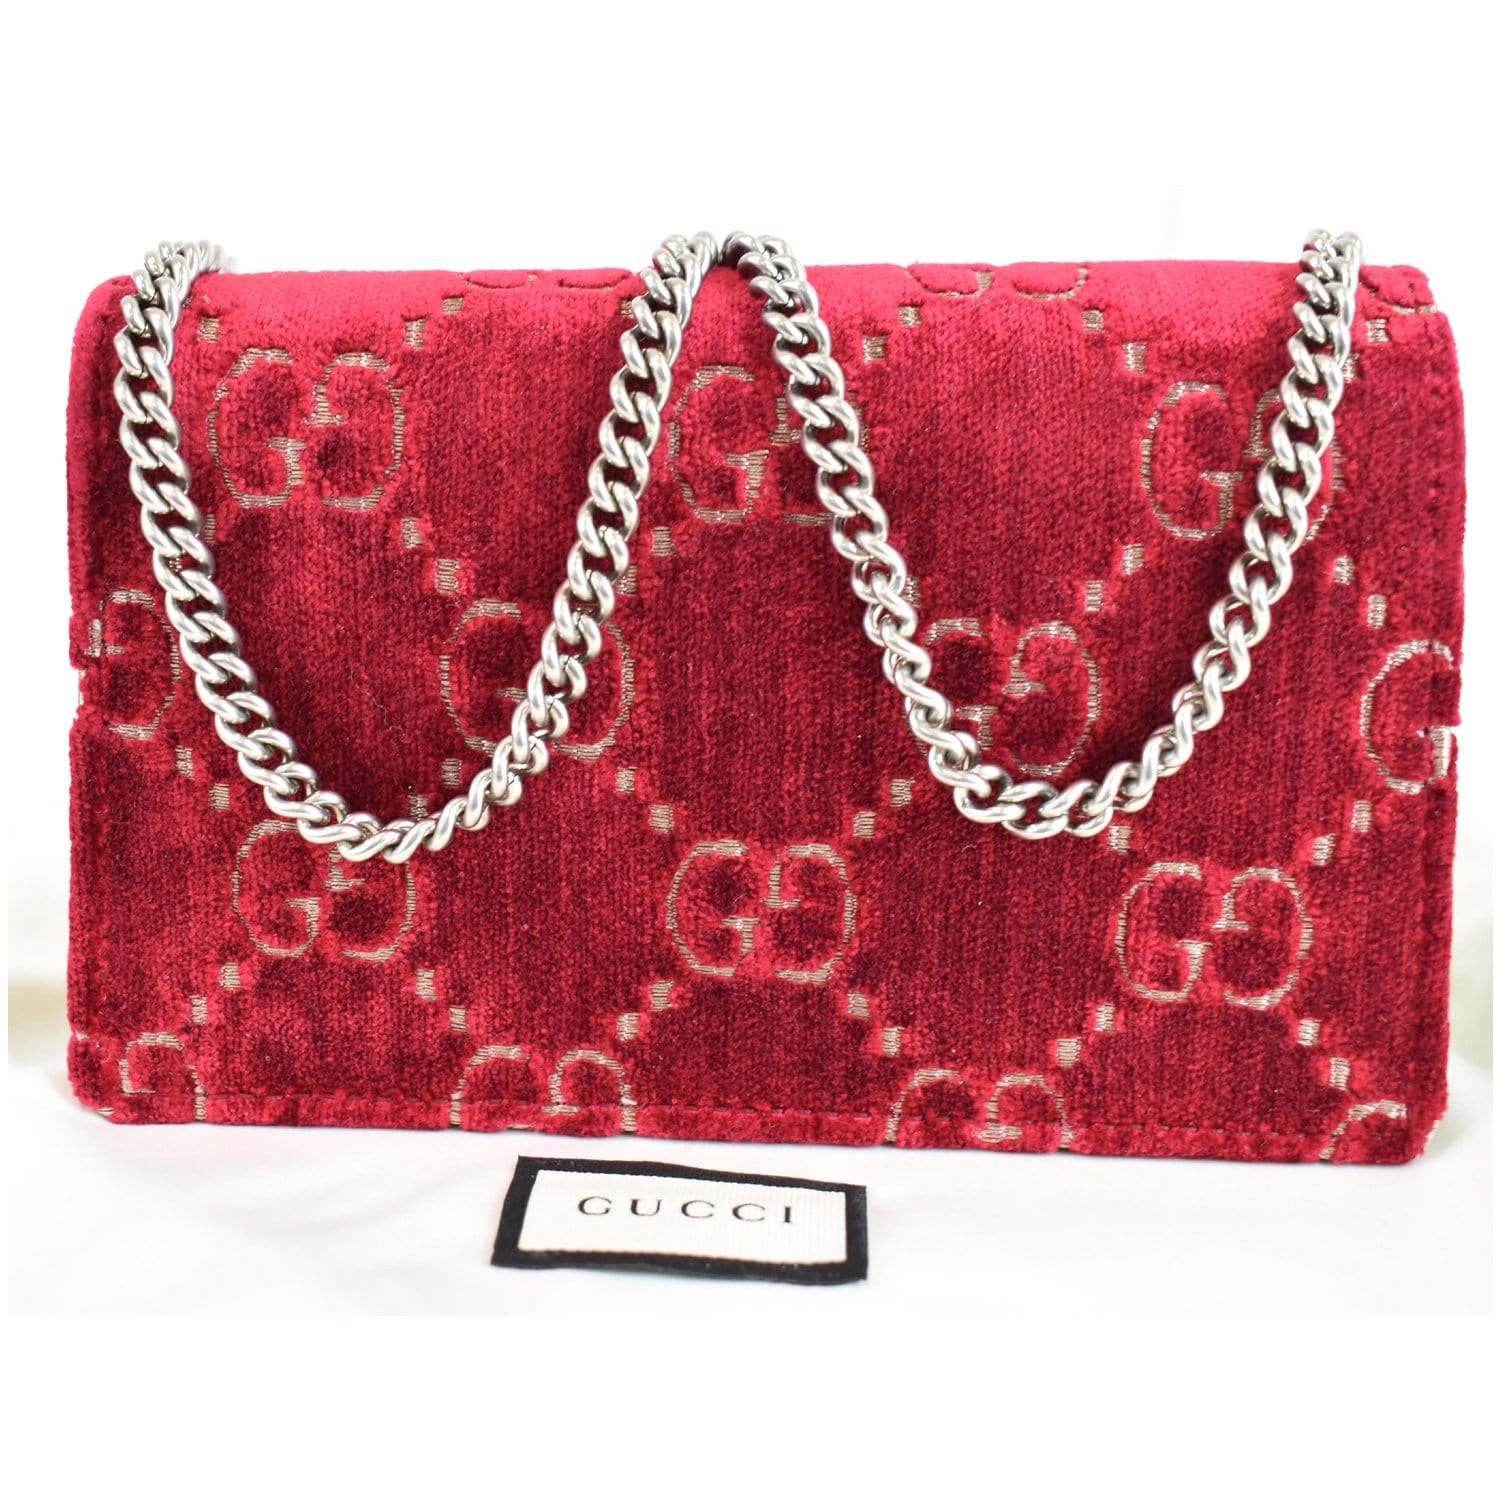 Gucci, Bags, Gucci Dionysus Gg Red Velvet Small Shoulder Bag